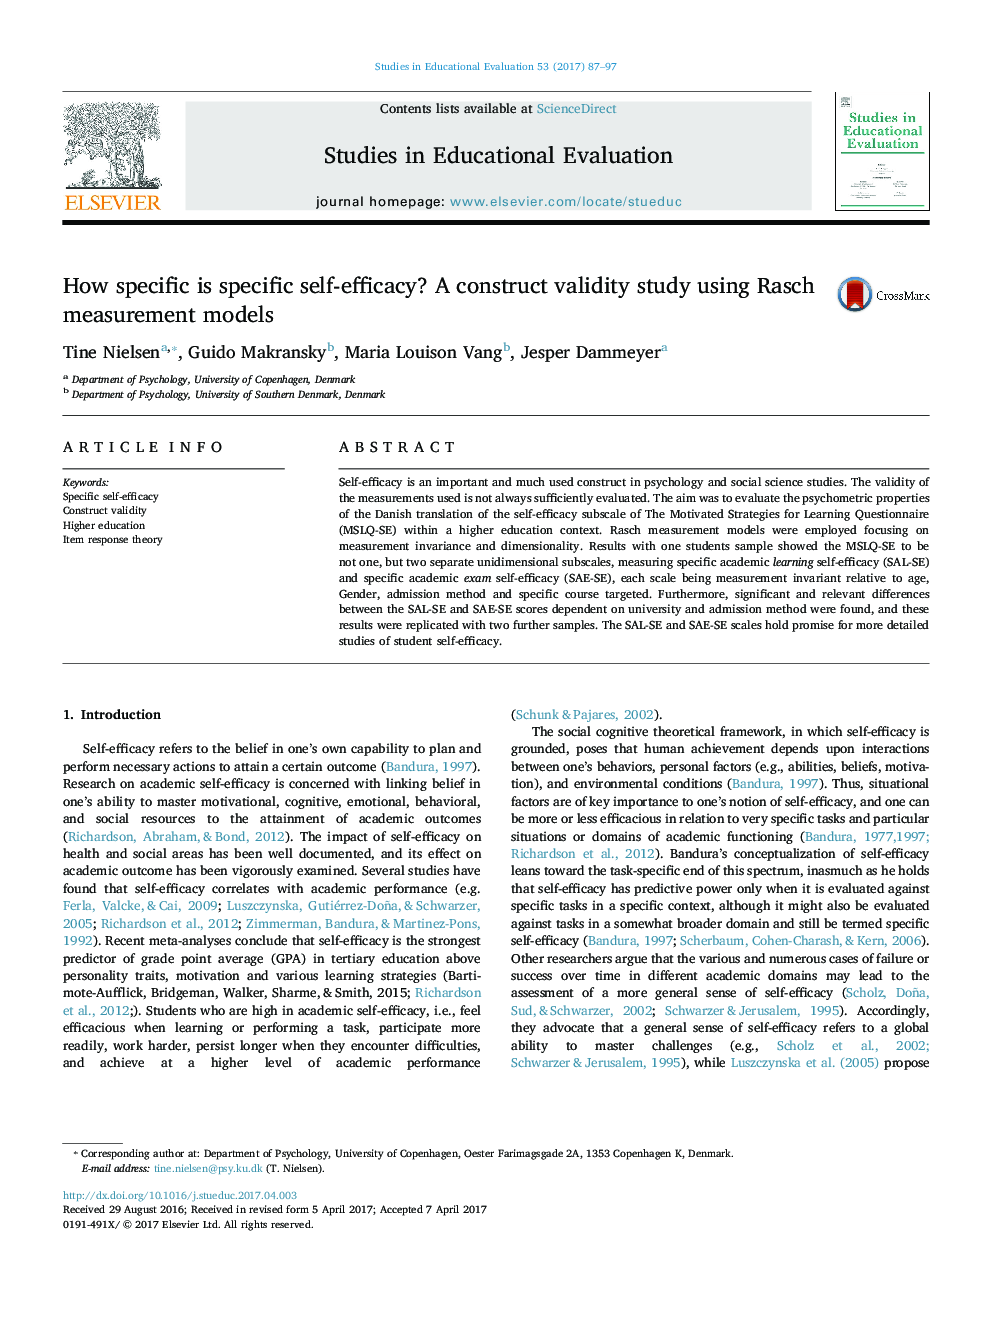 How specific is specific self-efficacy? A construct validity study using Rasch measurement models